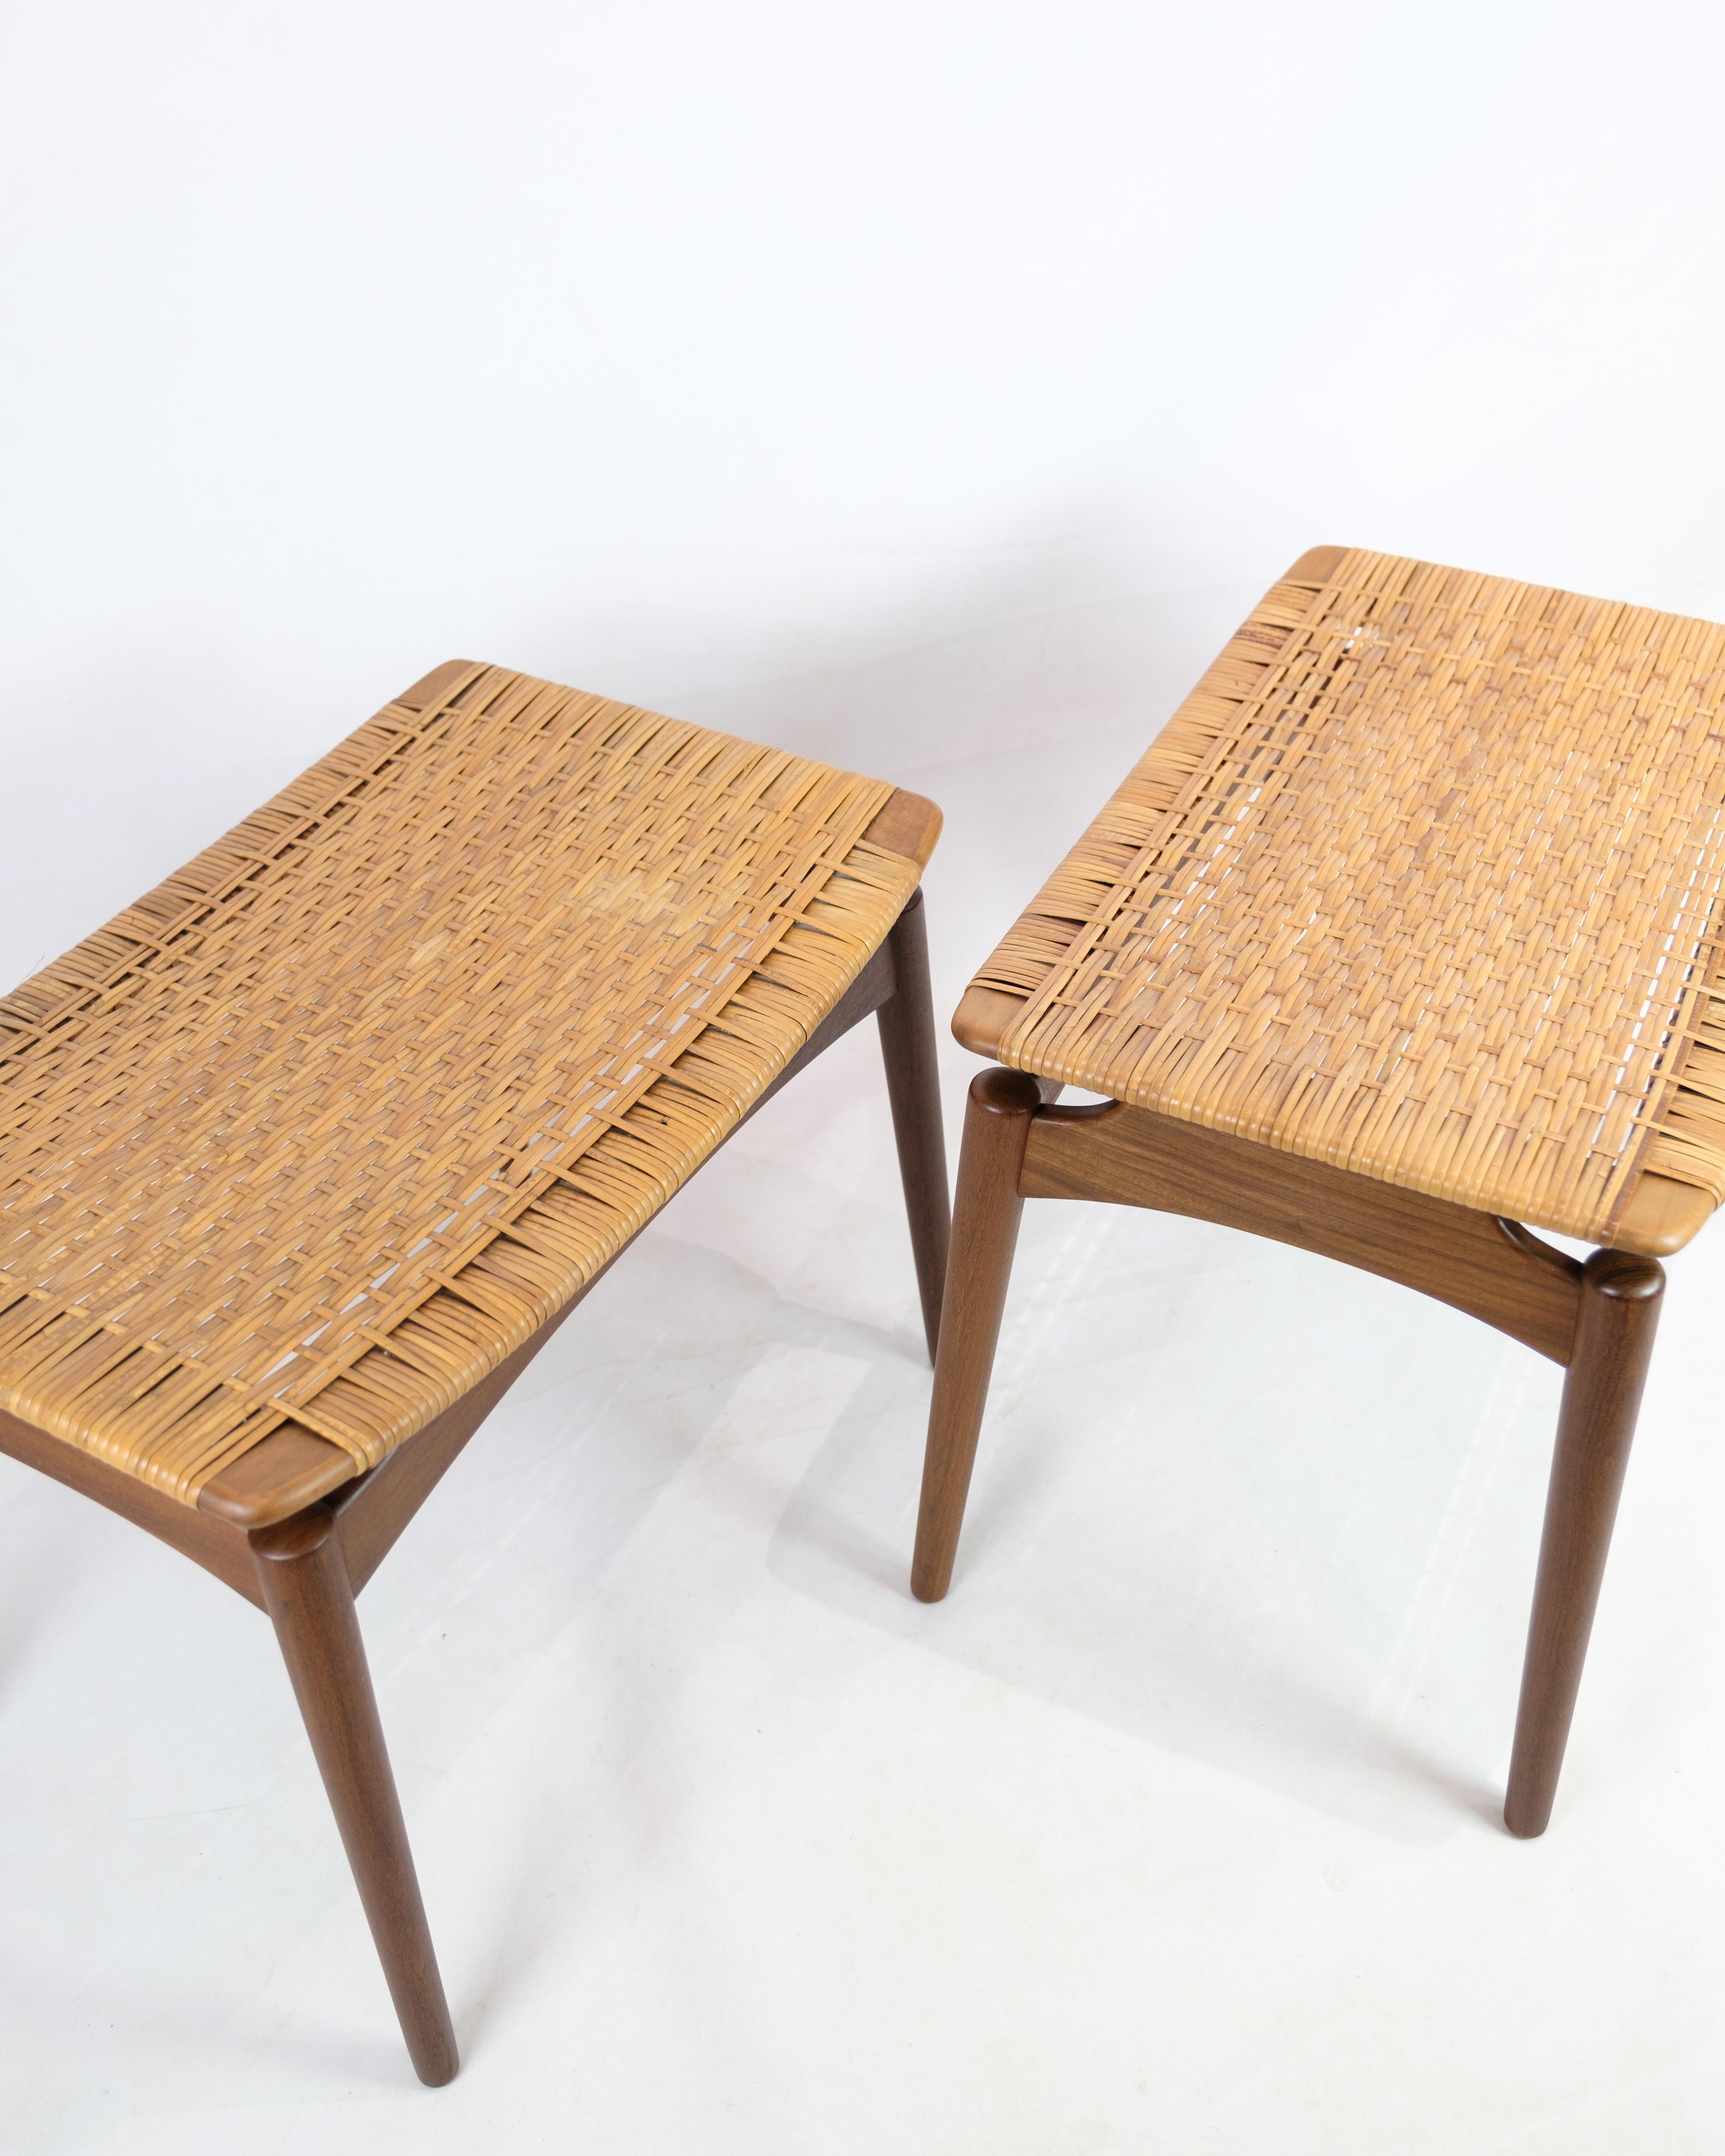 Papercord / Cane Footstools in Teak Wood By Sigfred Omann For Ølholm Furniture  For Sale 2